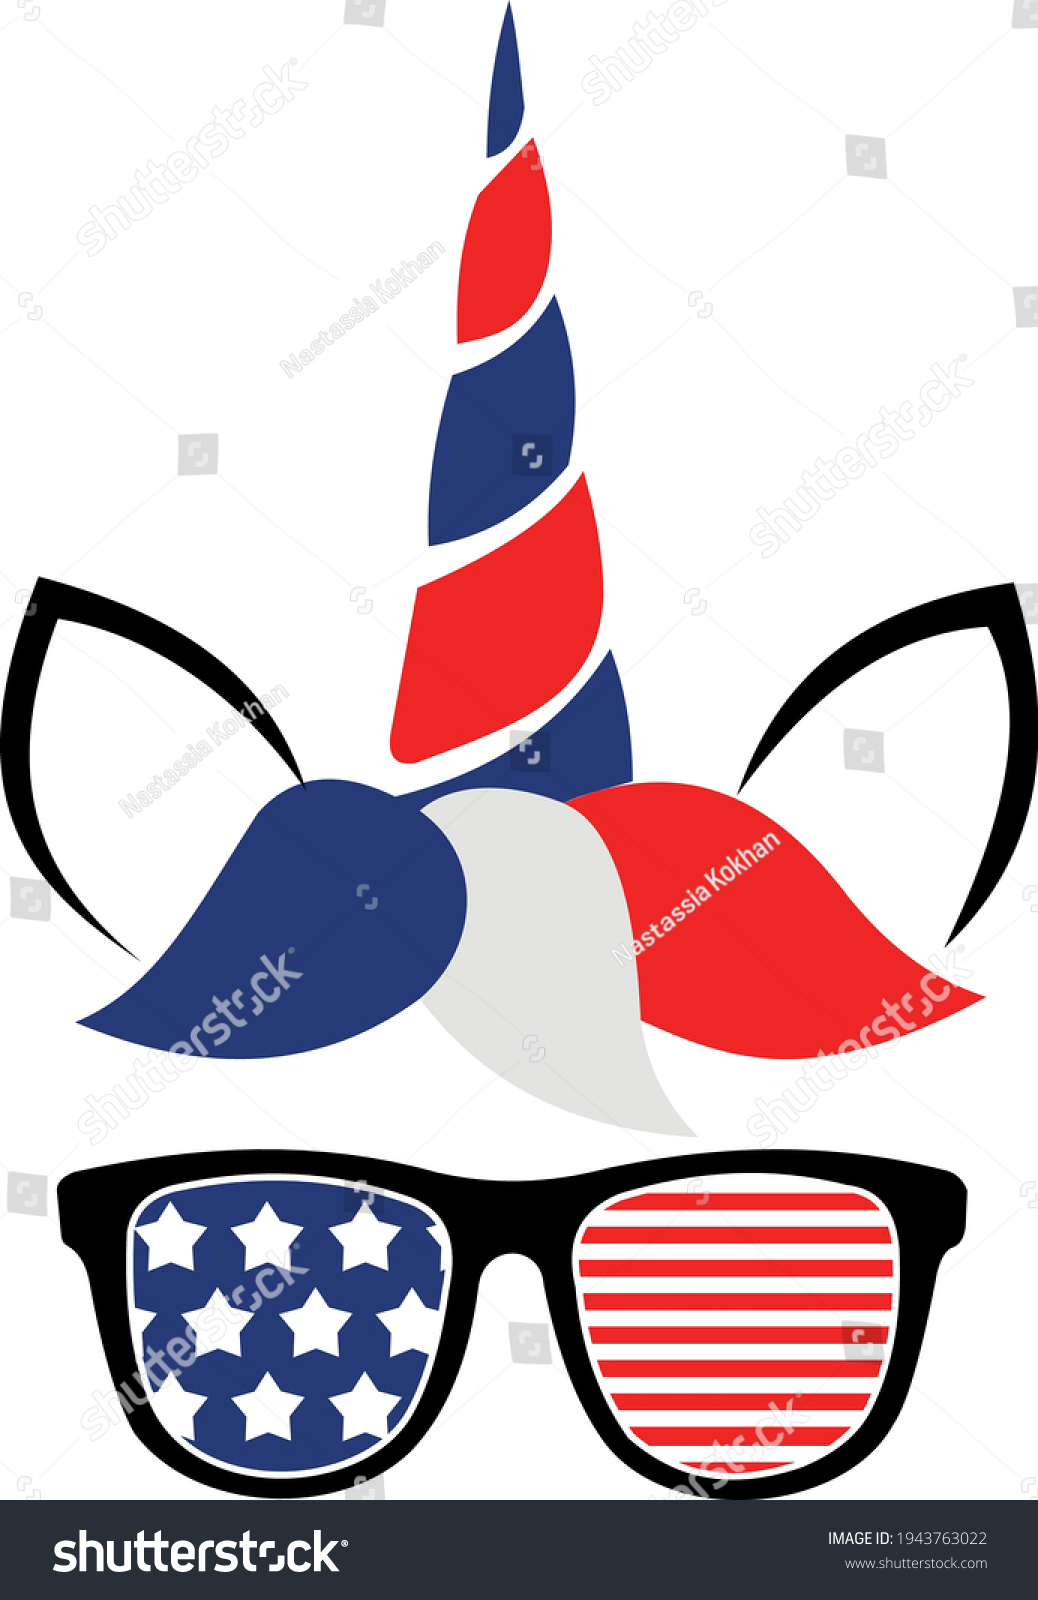 SVG of 4th of July Svg vector Illustration isolated on white background. Independence day party decor. 4th of July Unicorn svg for design shirt and scrapbooking.Unicorn with stars and stripes. svg